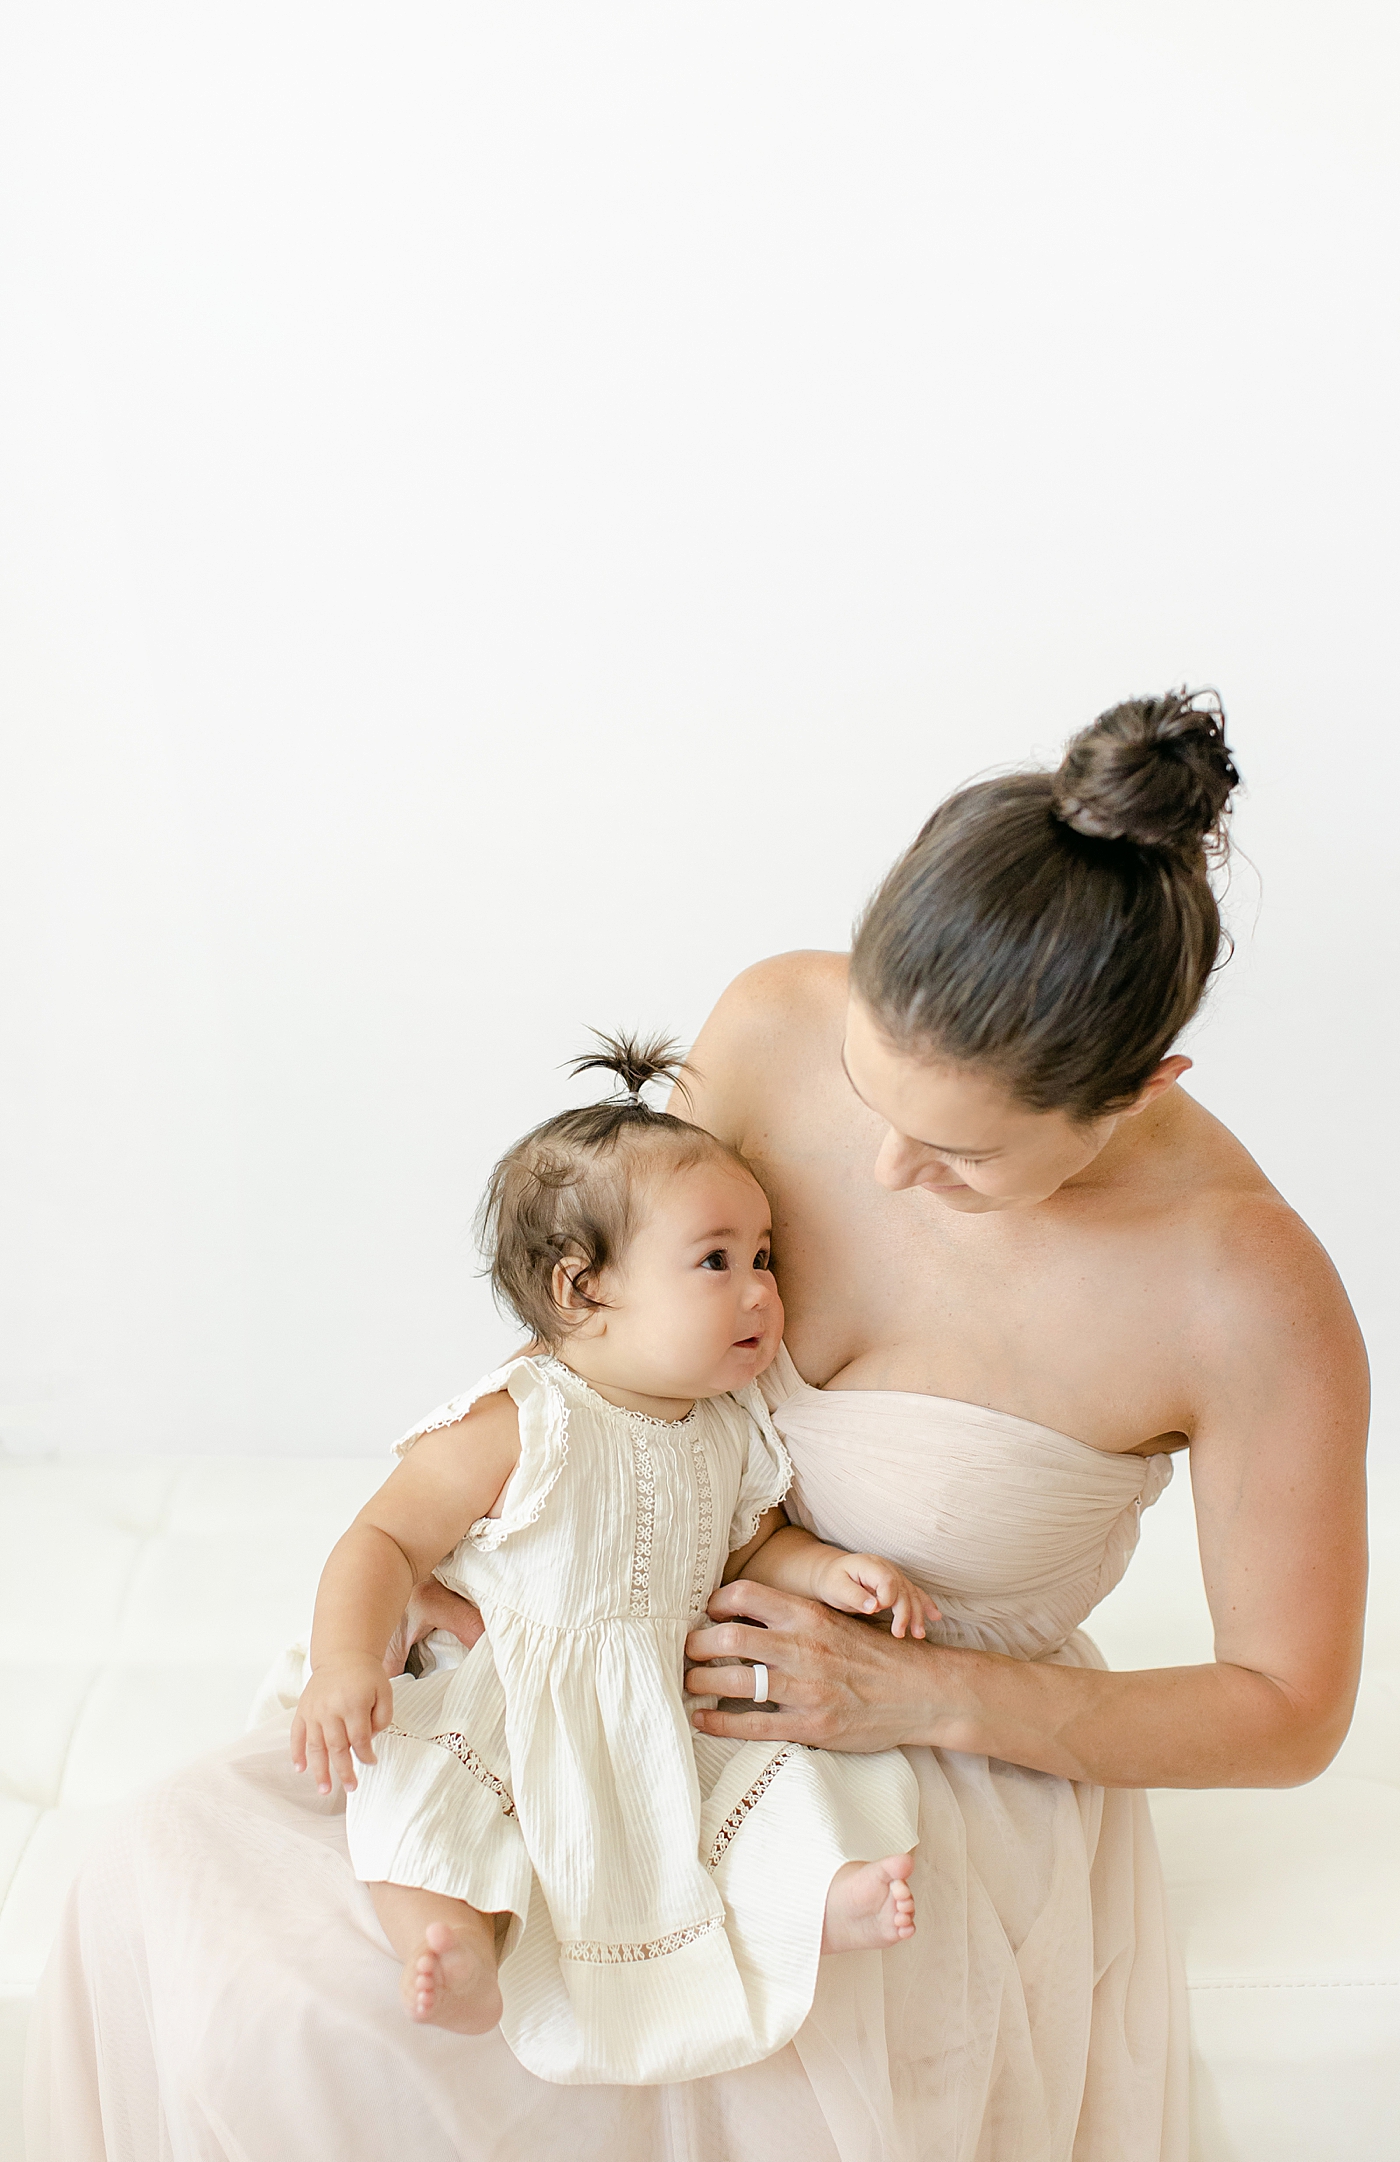 Mom holding her baby girl while they wear matching cream dresses during her Six Month Studio Session | Image by Chrissy Winchester Photography